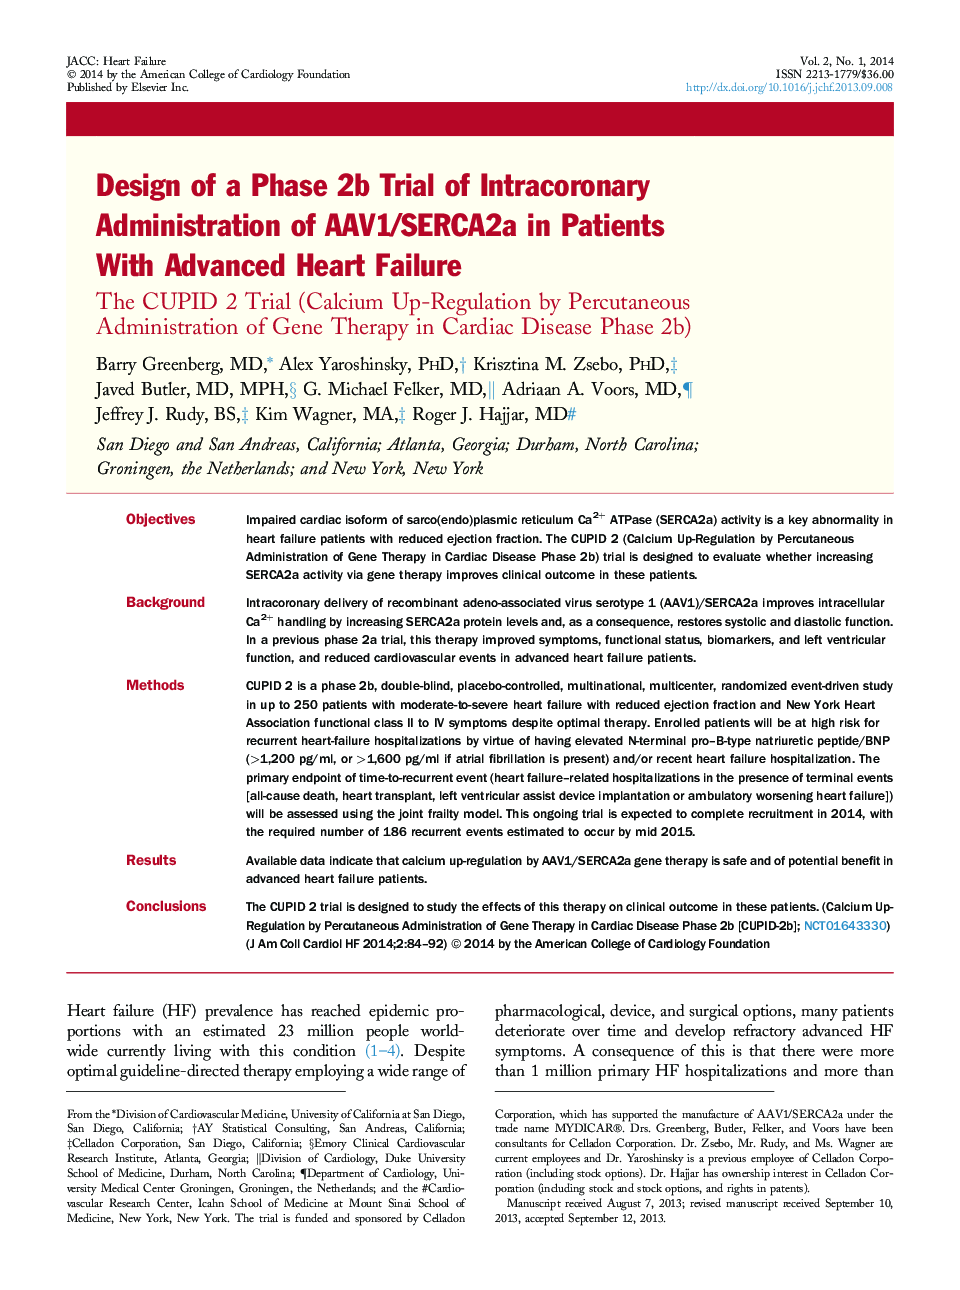 Design of a Phase 2b Trial of Intracoronary Administration of AAV1/SERCA2a in Patients With Advanced Heart Failure : The CUPID 2 Trial (Calcium Up-Regulation by Percutaneous Administration of Gene Therapy in Cardiac Disease Phase 2b)